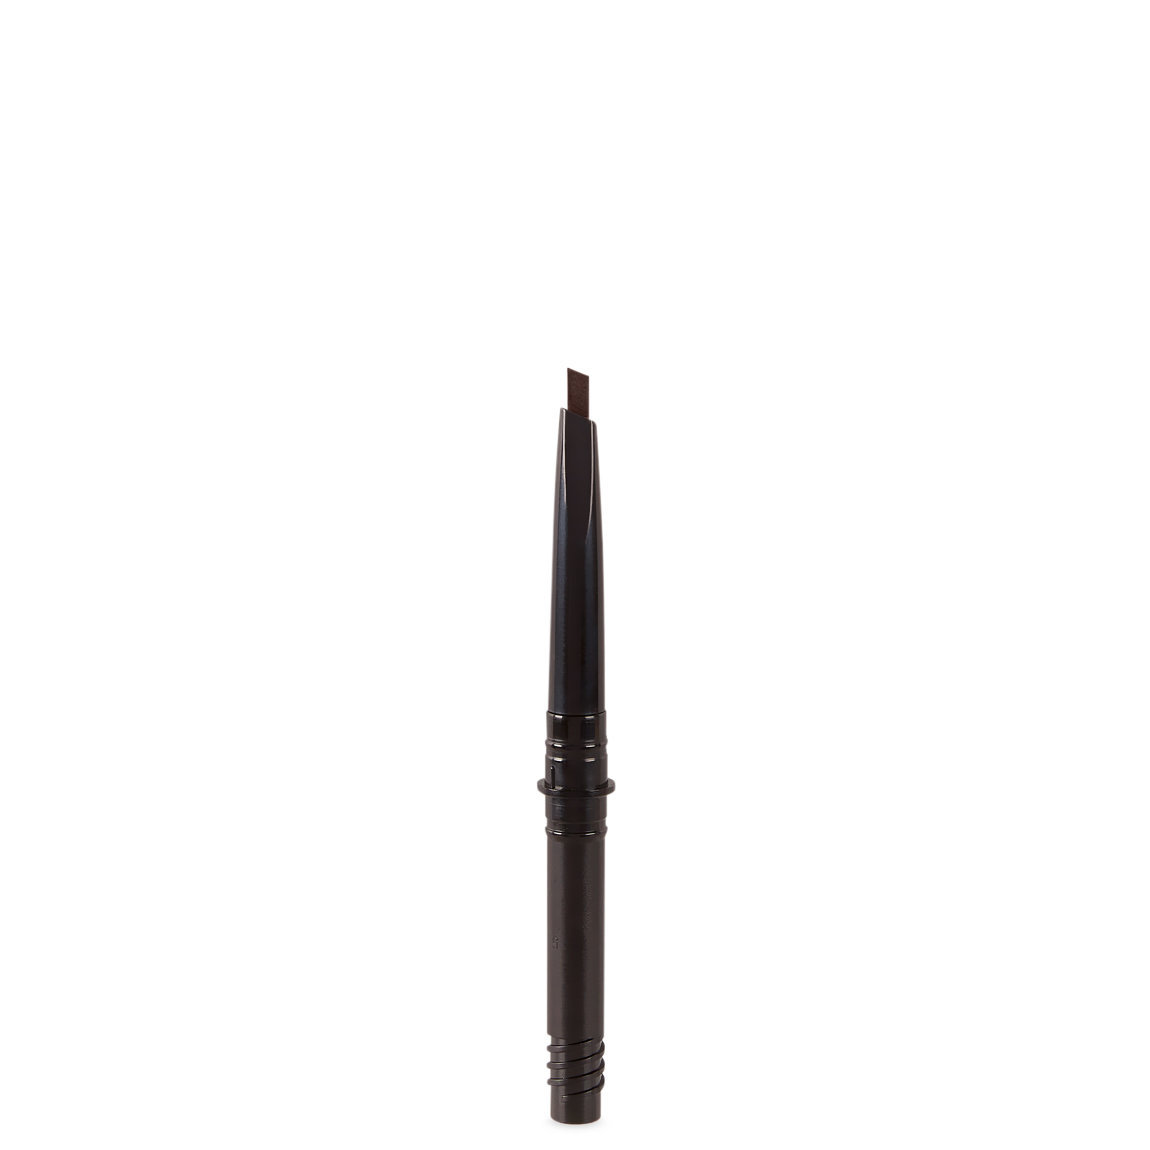 Charlotte Tilbury Brow Cheat Refill Black Brown alternative view 1 - product swatch.